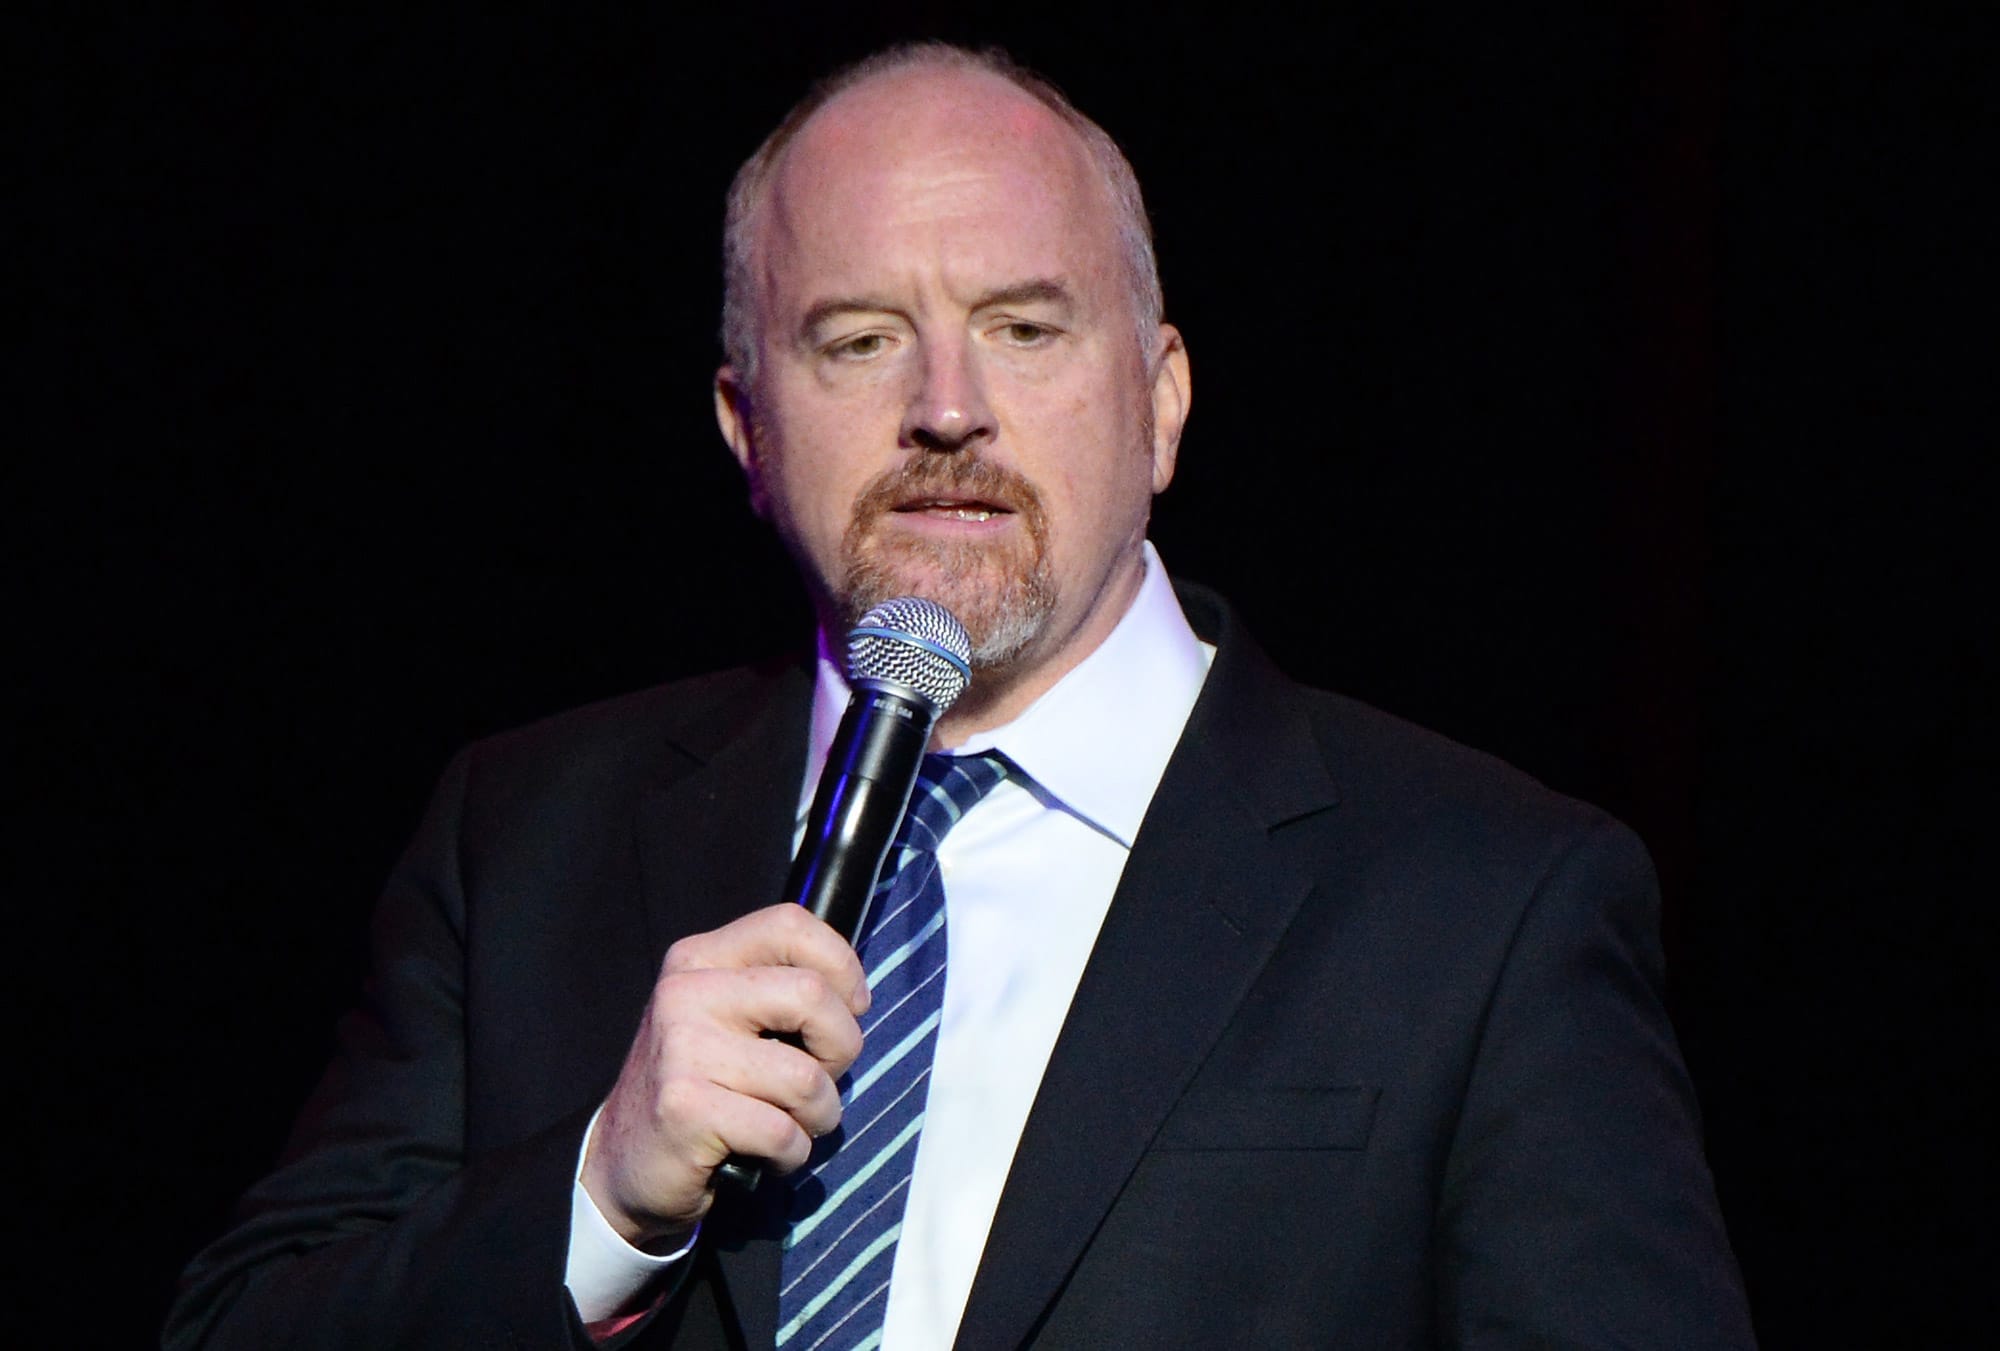 Disgraced comedian Louis CK is going on a world tour — so much for cancel culture - Financial Hobby